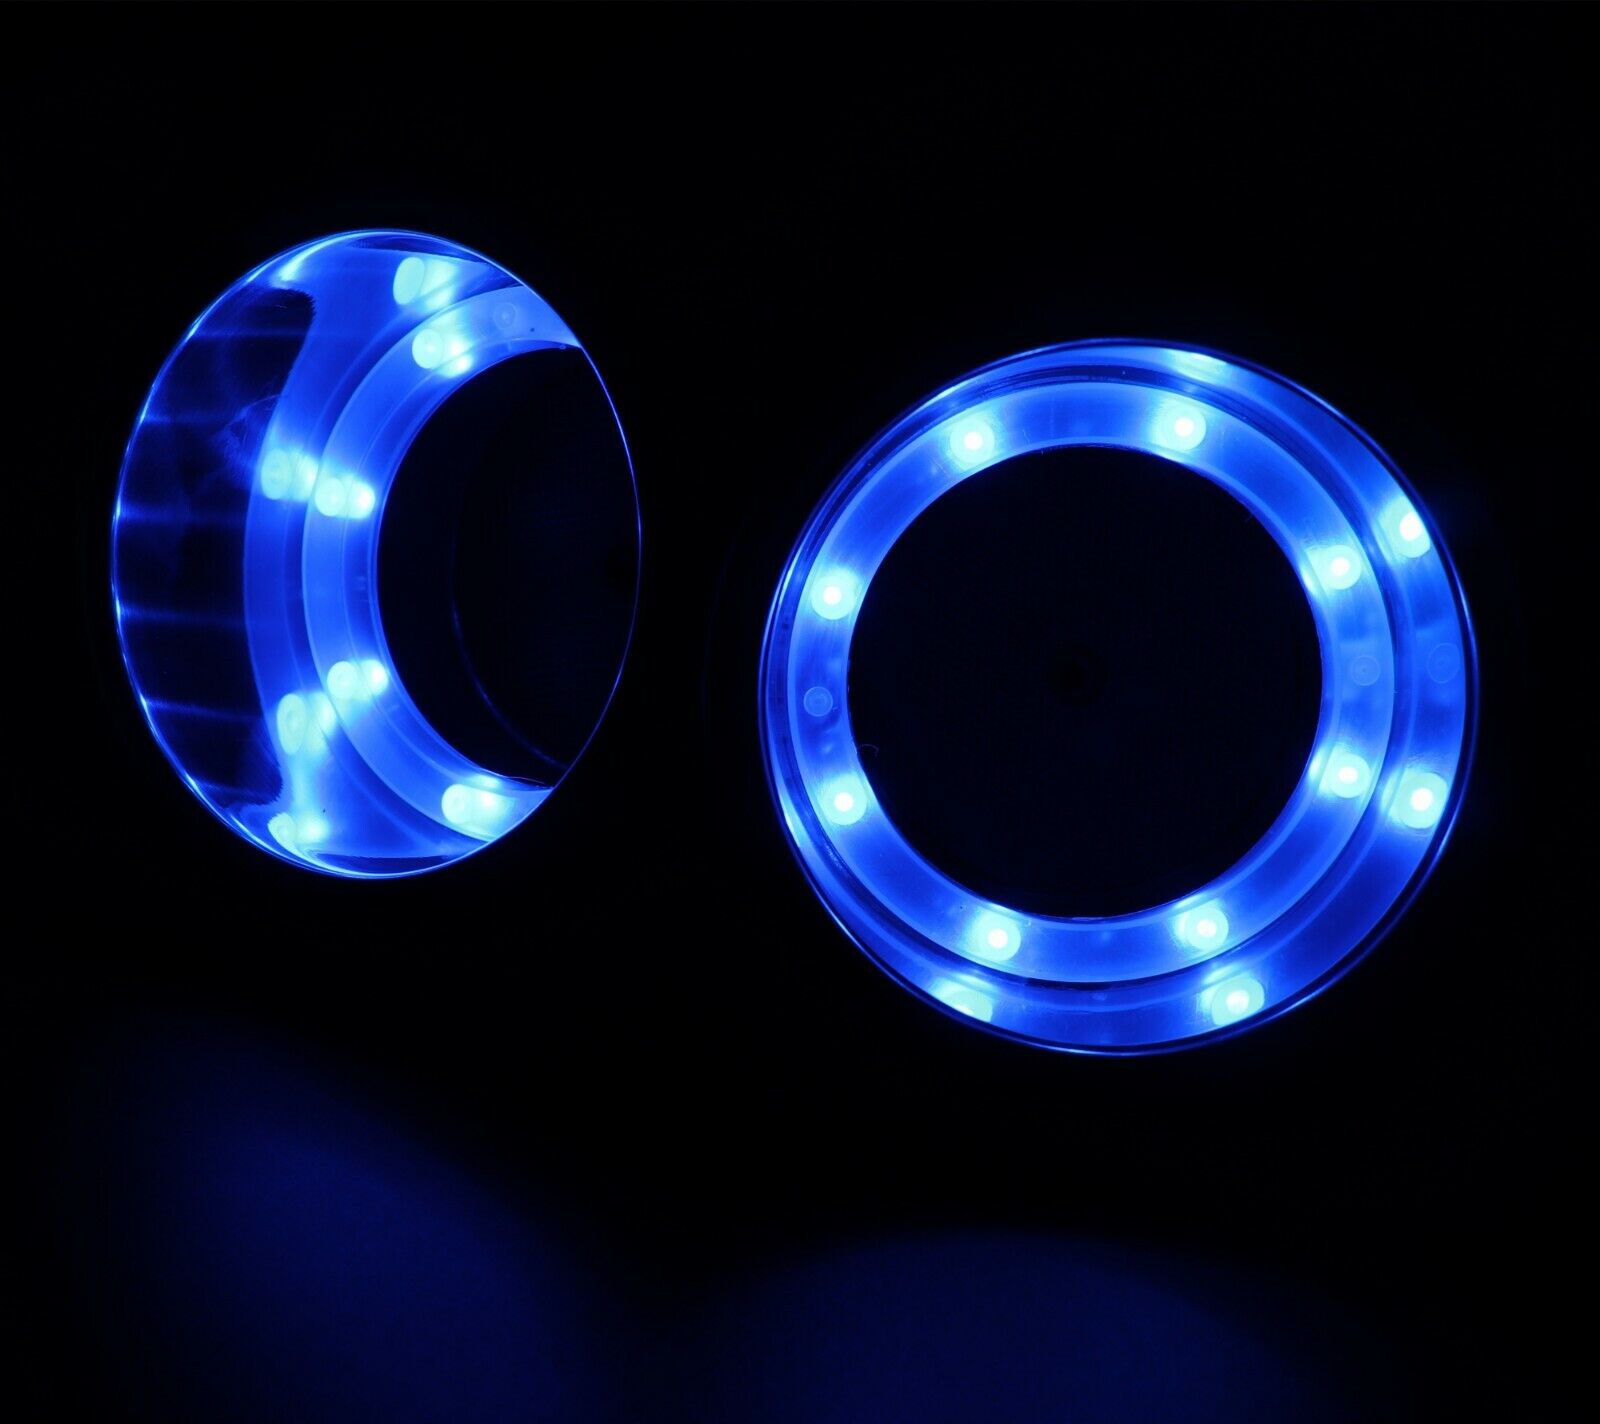 2X Stainless Steel LED Blue Light Cup Drink Holder for Boat/Yacht /Car/Truck RV